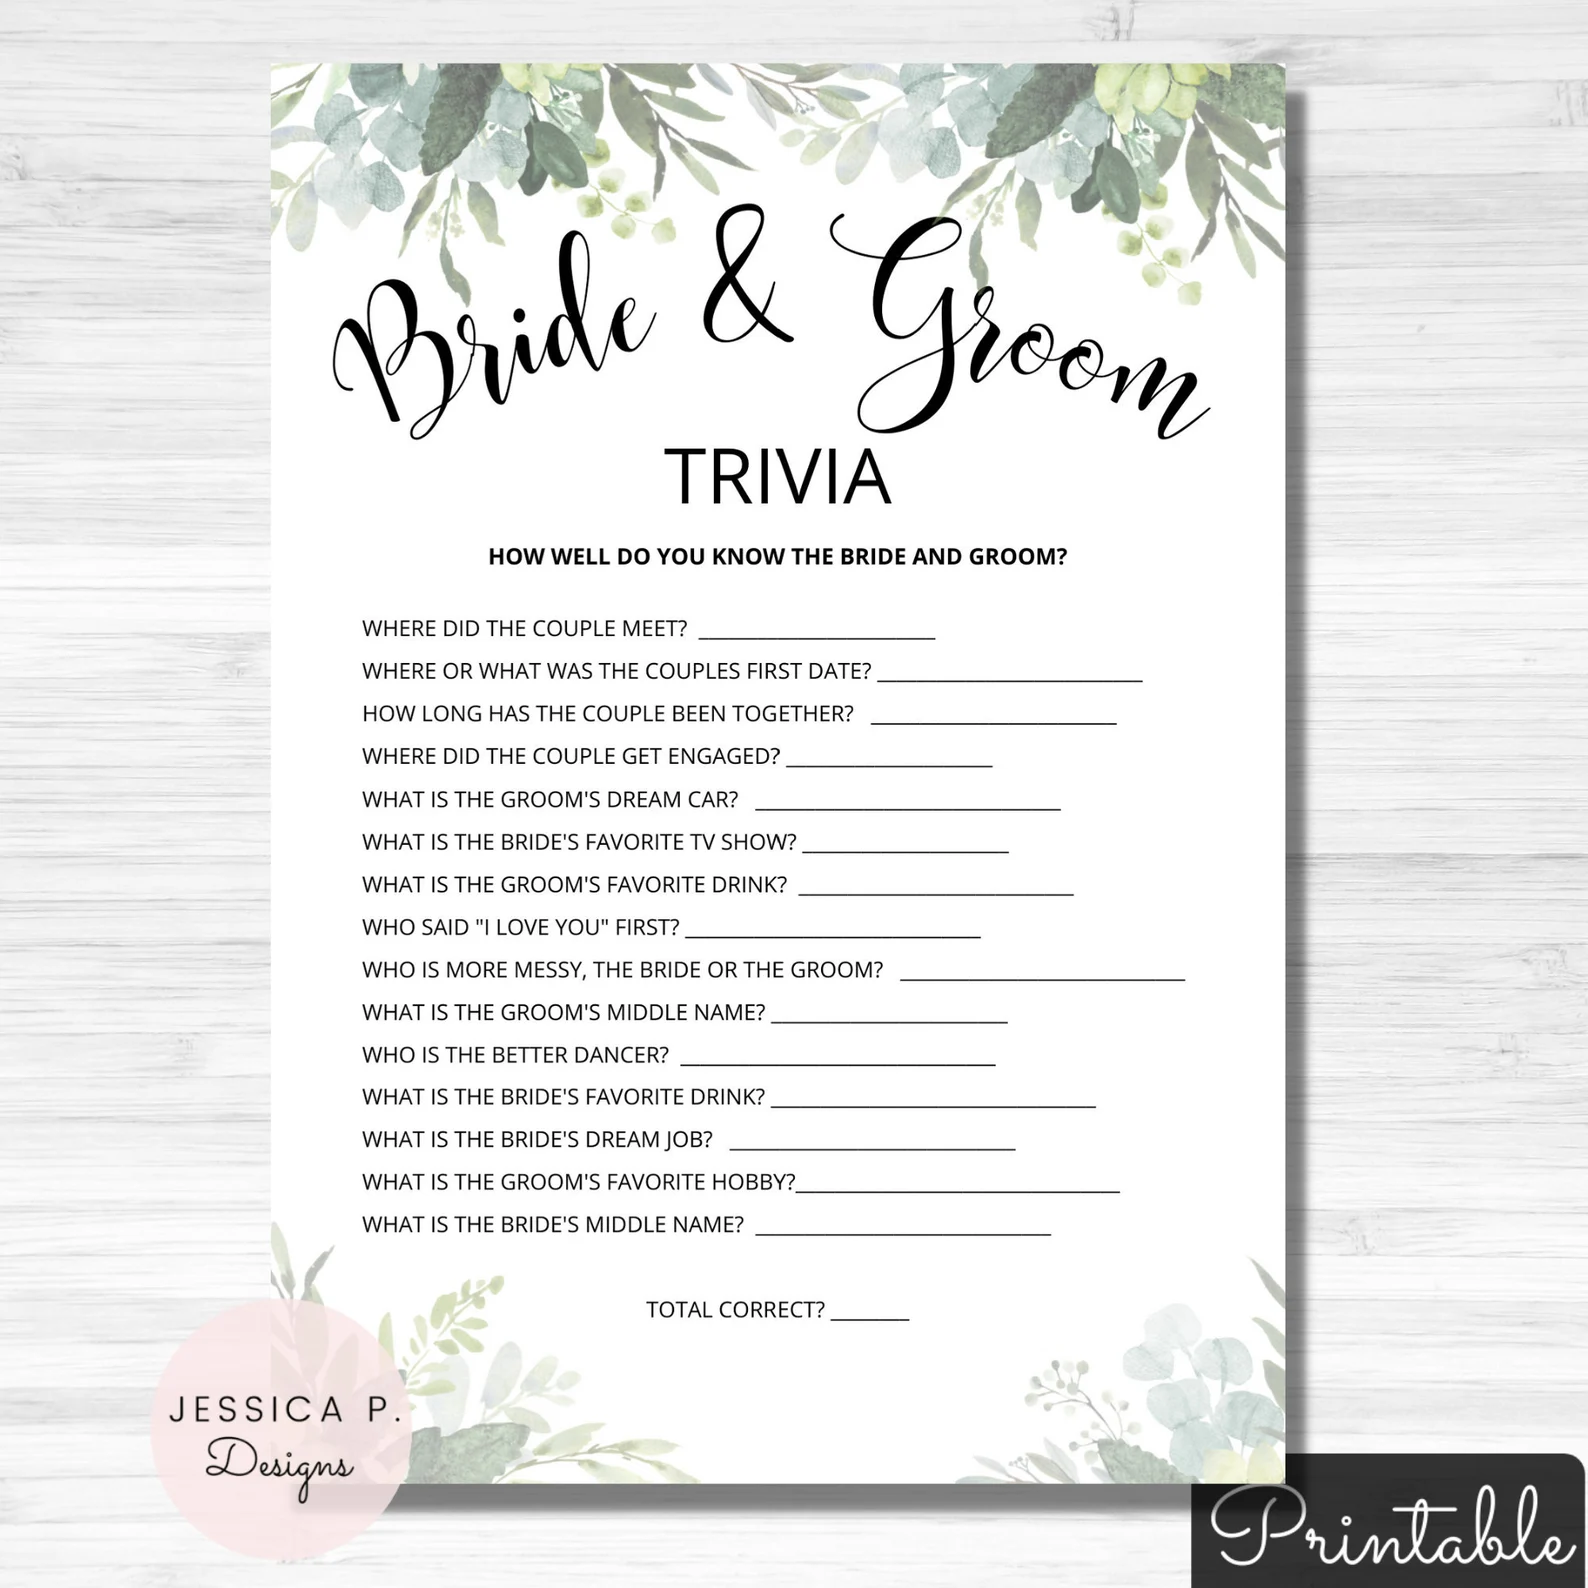 Greenery Bridal Shower Games Bride and Groom Trivia